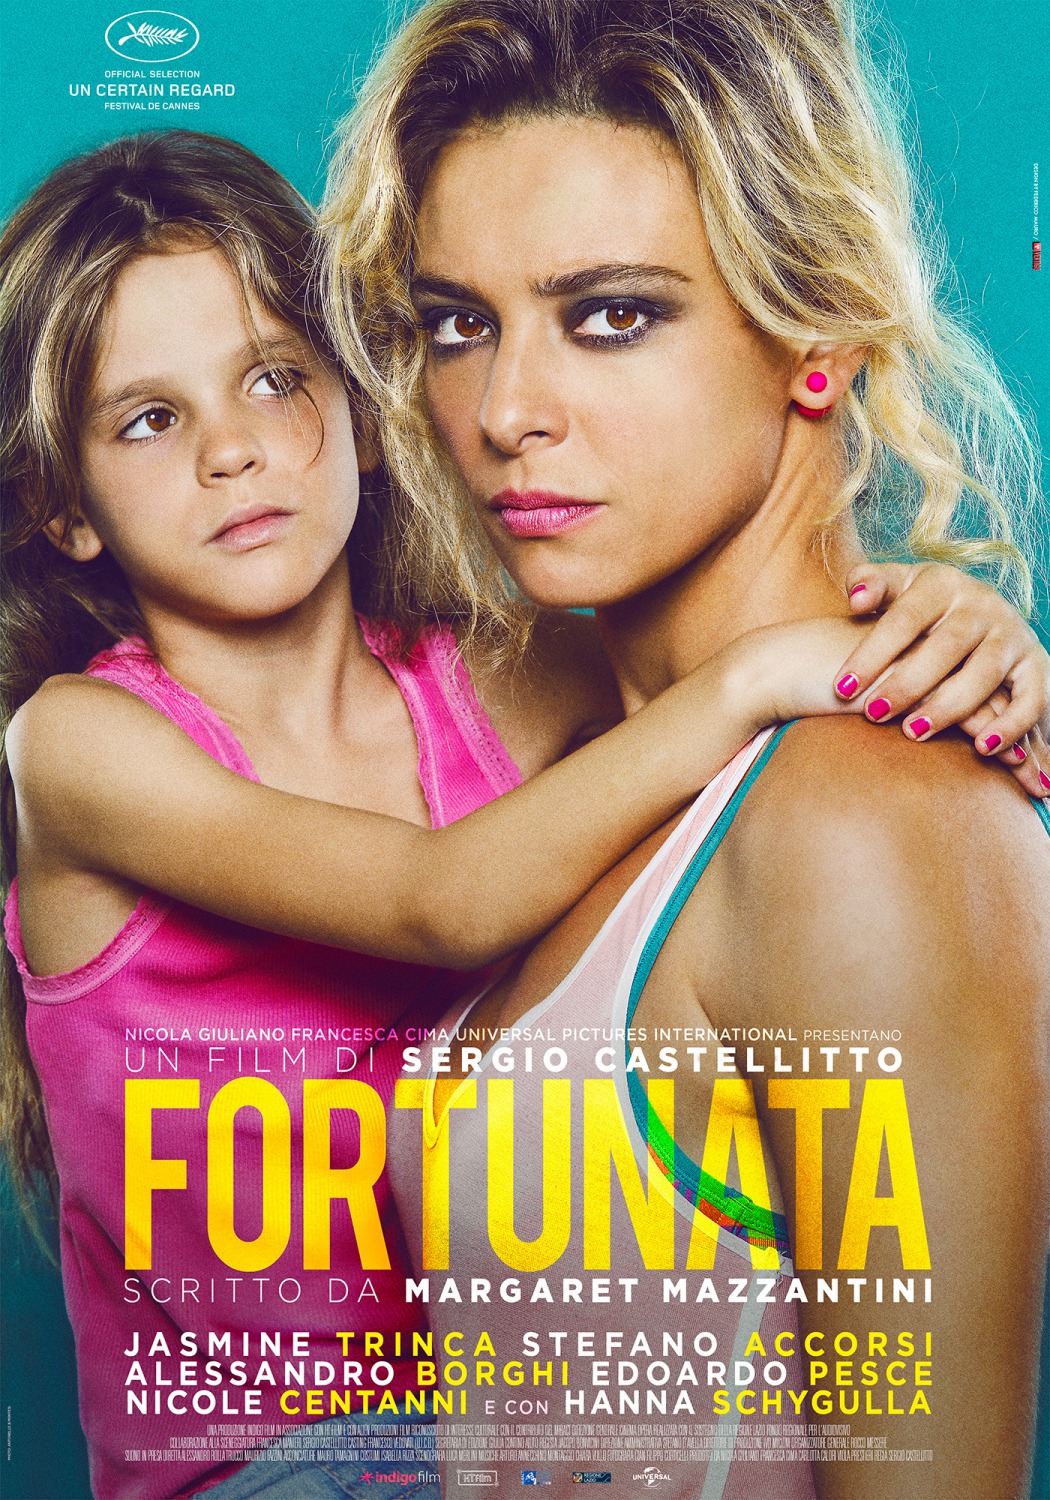 Extra Large Movie Poster Image for Fortunata 